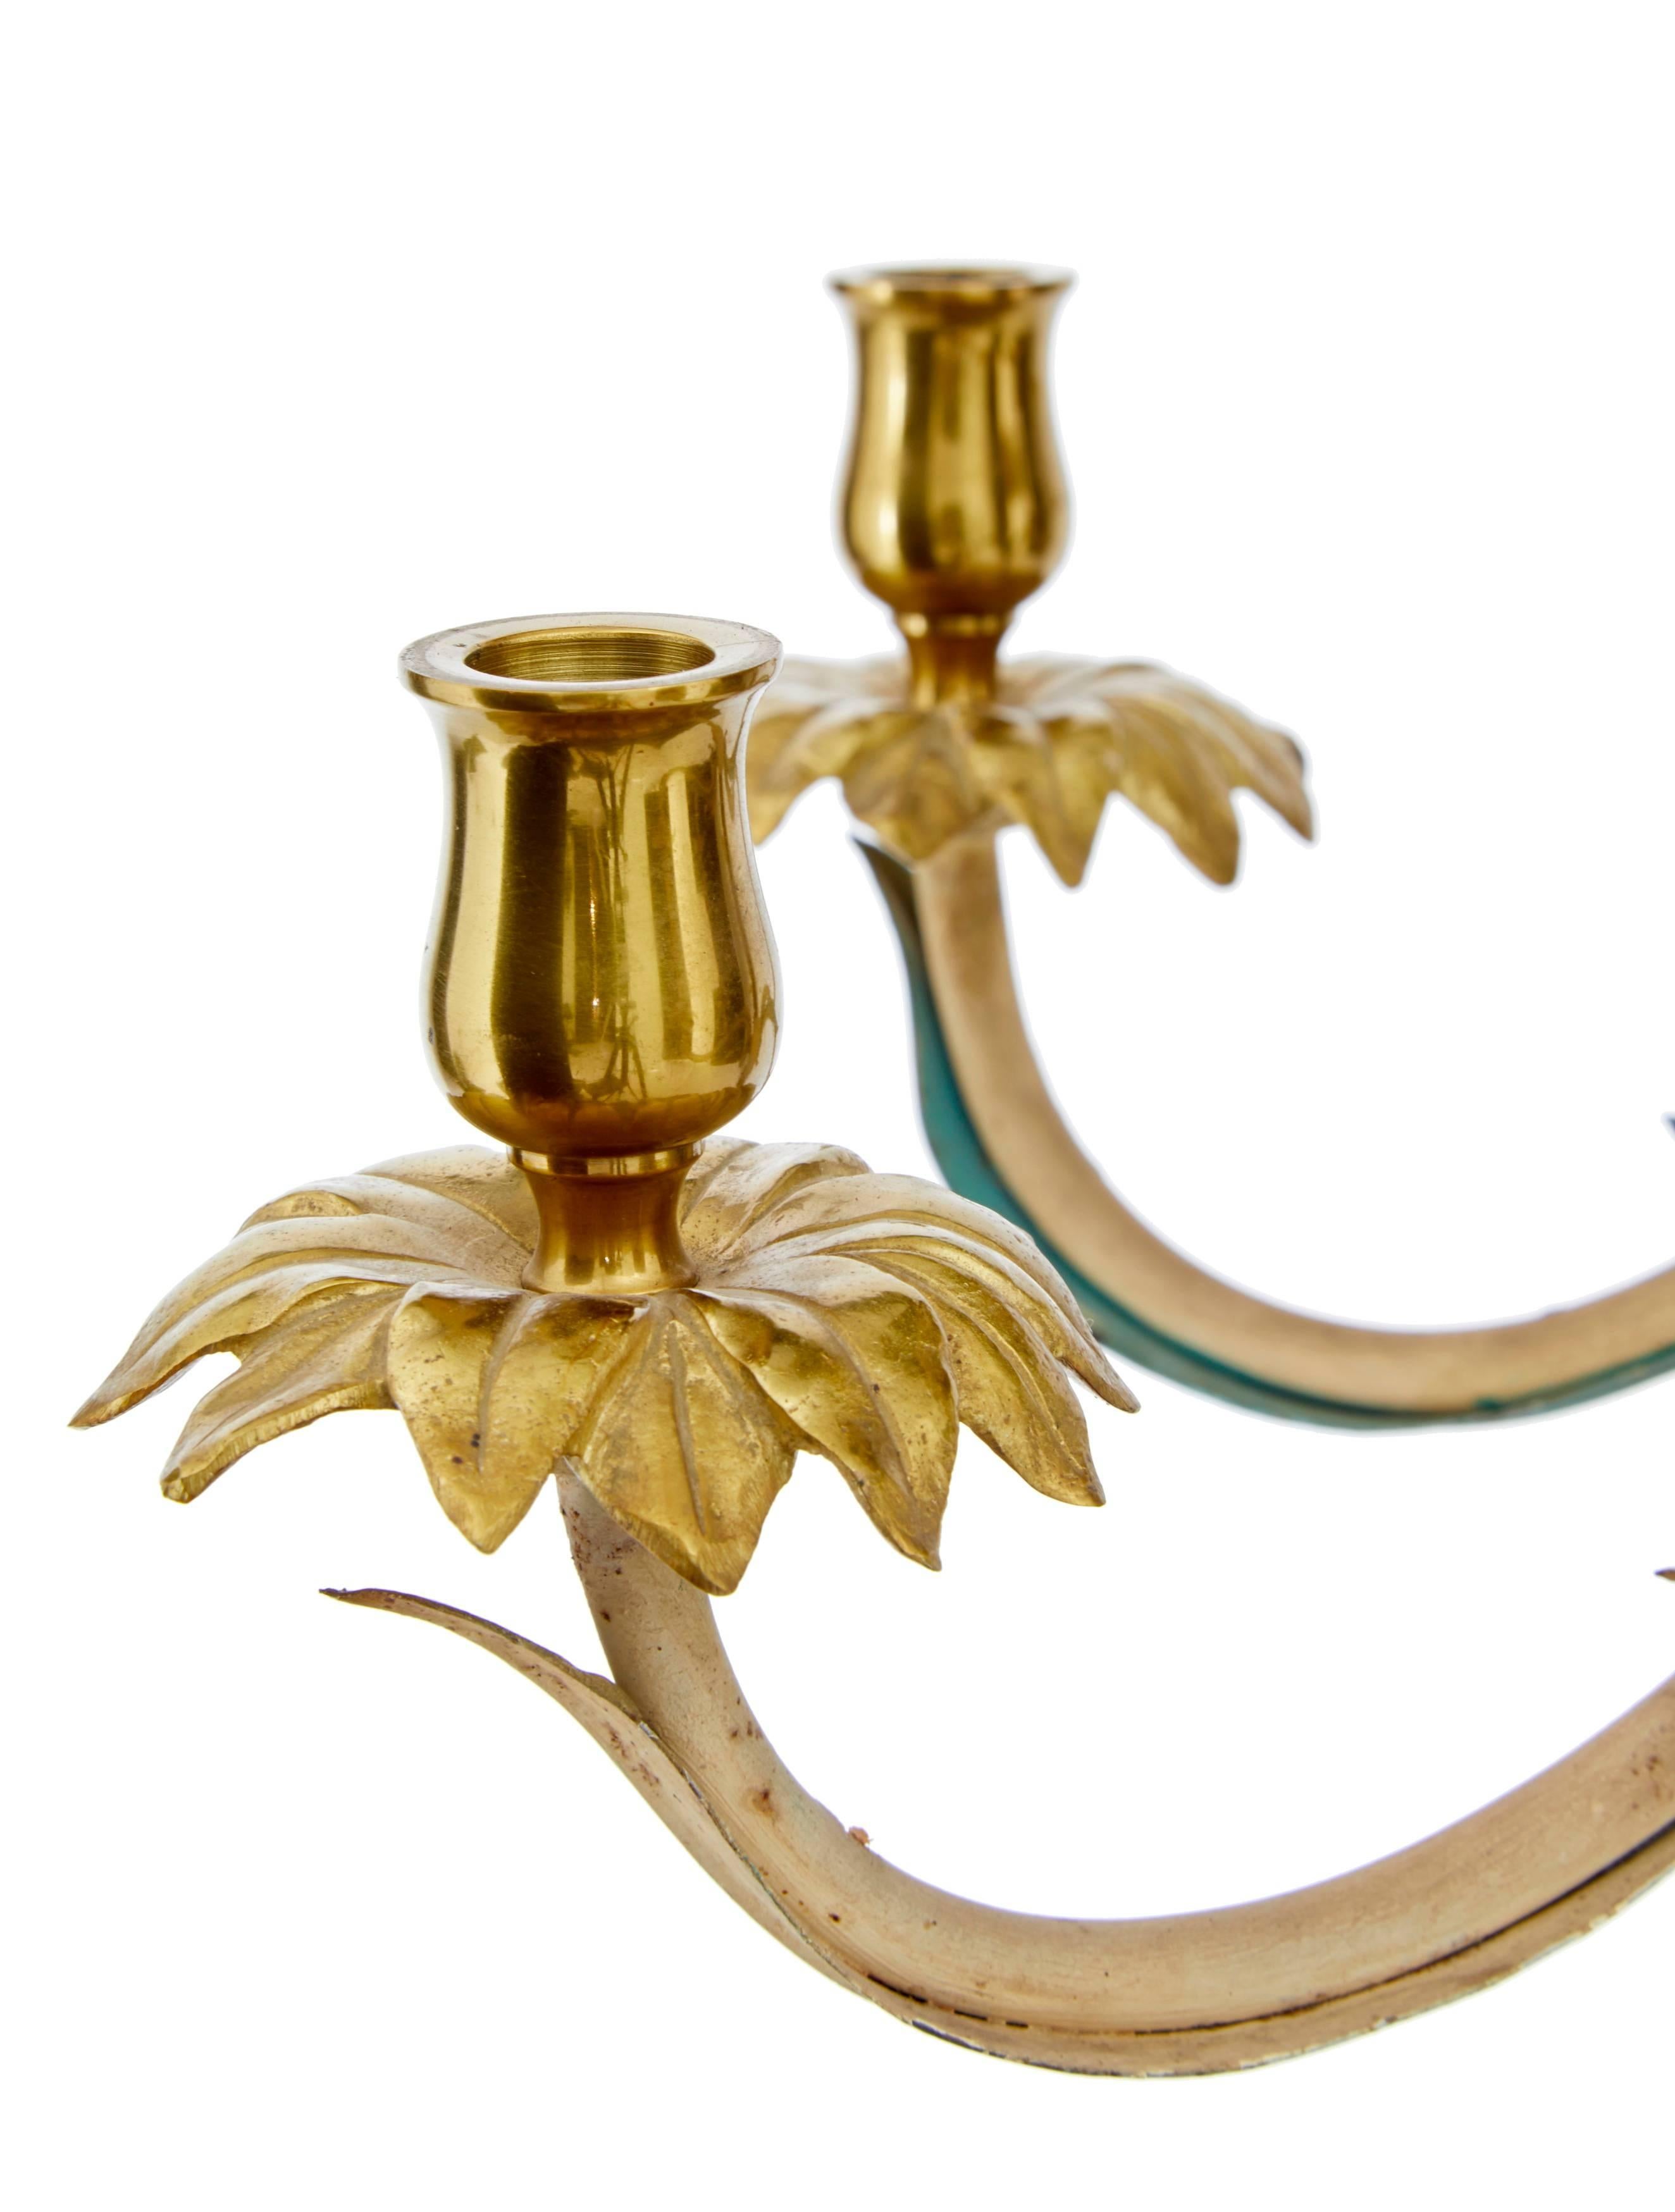 Six-arm chandelier by reknowned French maker Bagues.
Good quality polished brass, decorated with painted leaves to form a palm.
Spun brass ceiling rose with chain support which hooks on to the light.
No electrics.

Measures: Height 37